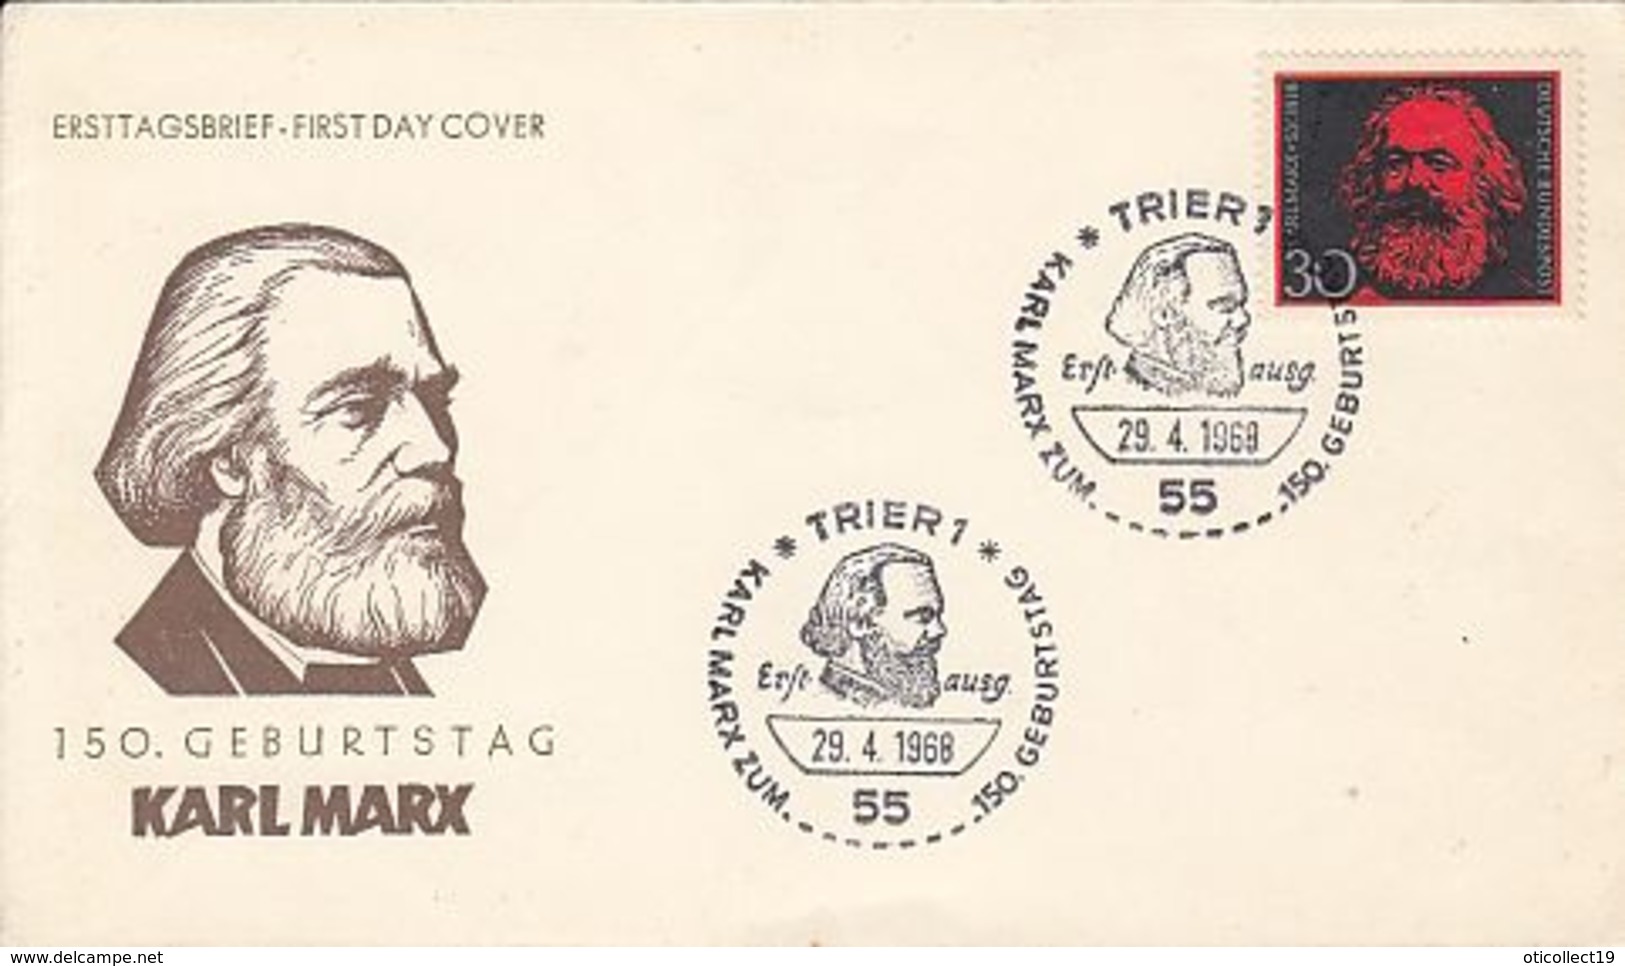 FAMOUS PEOPLE, KARL MARX, COVER FDC, 1968, GERMANY - Karl Marx